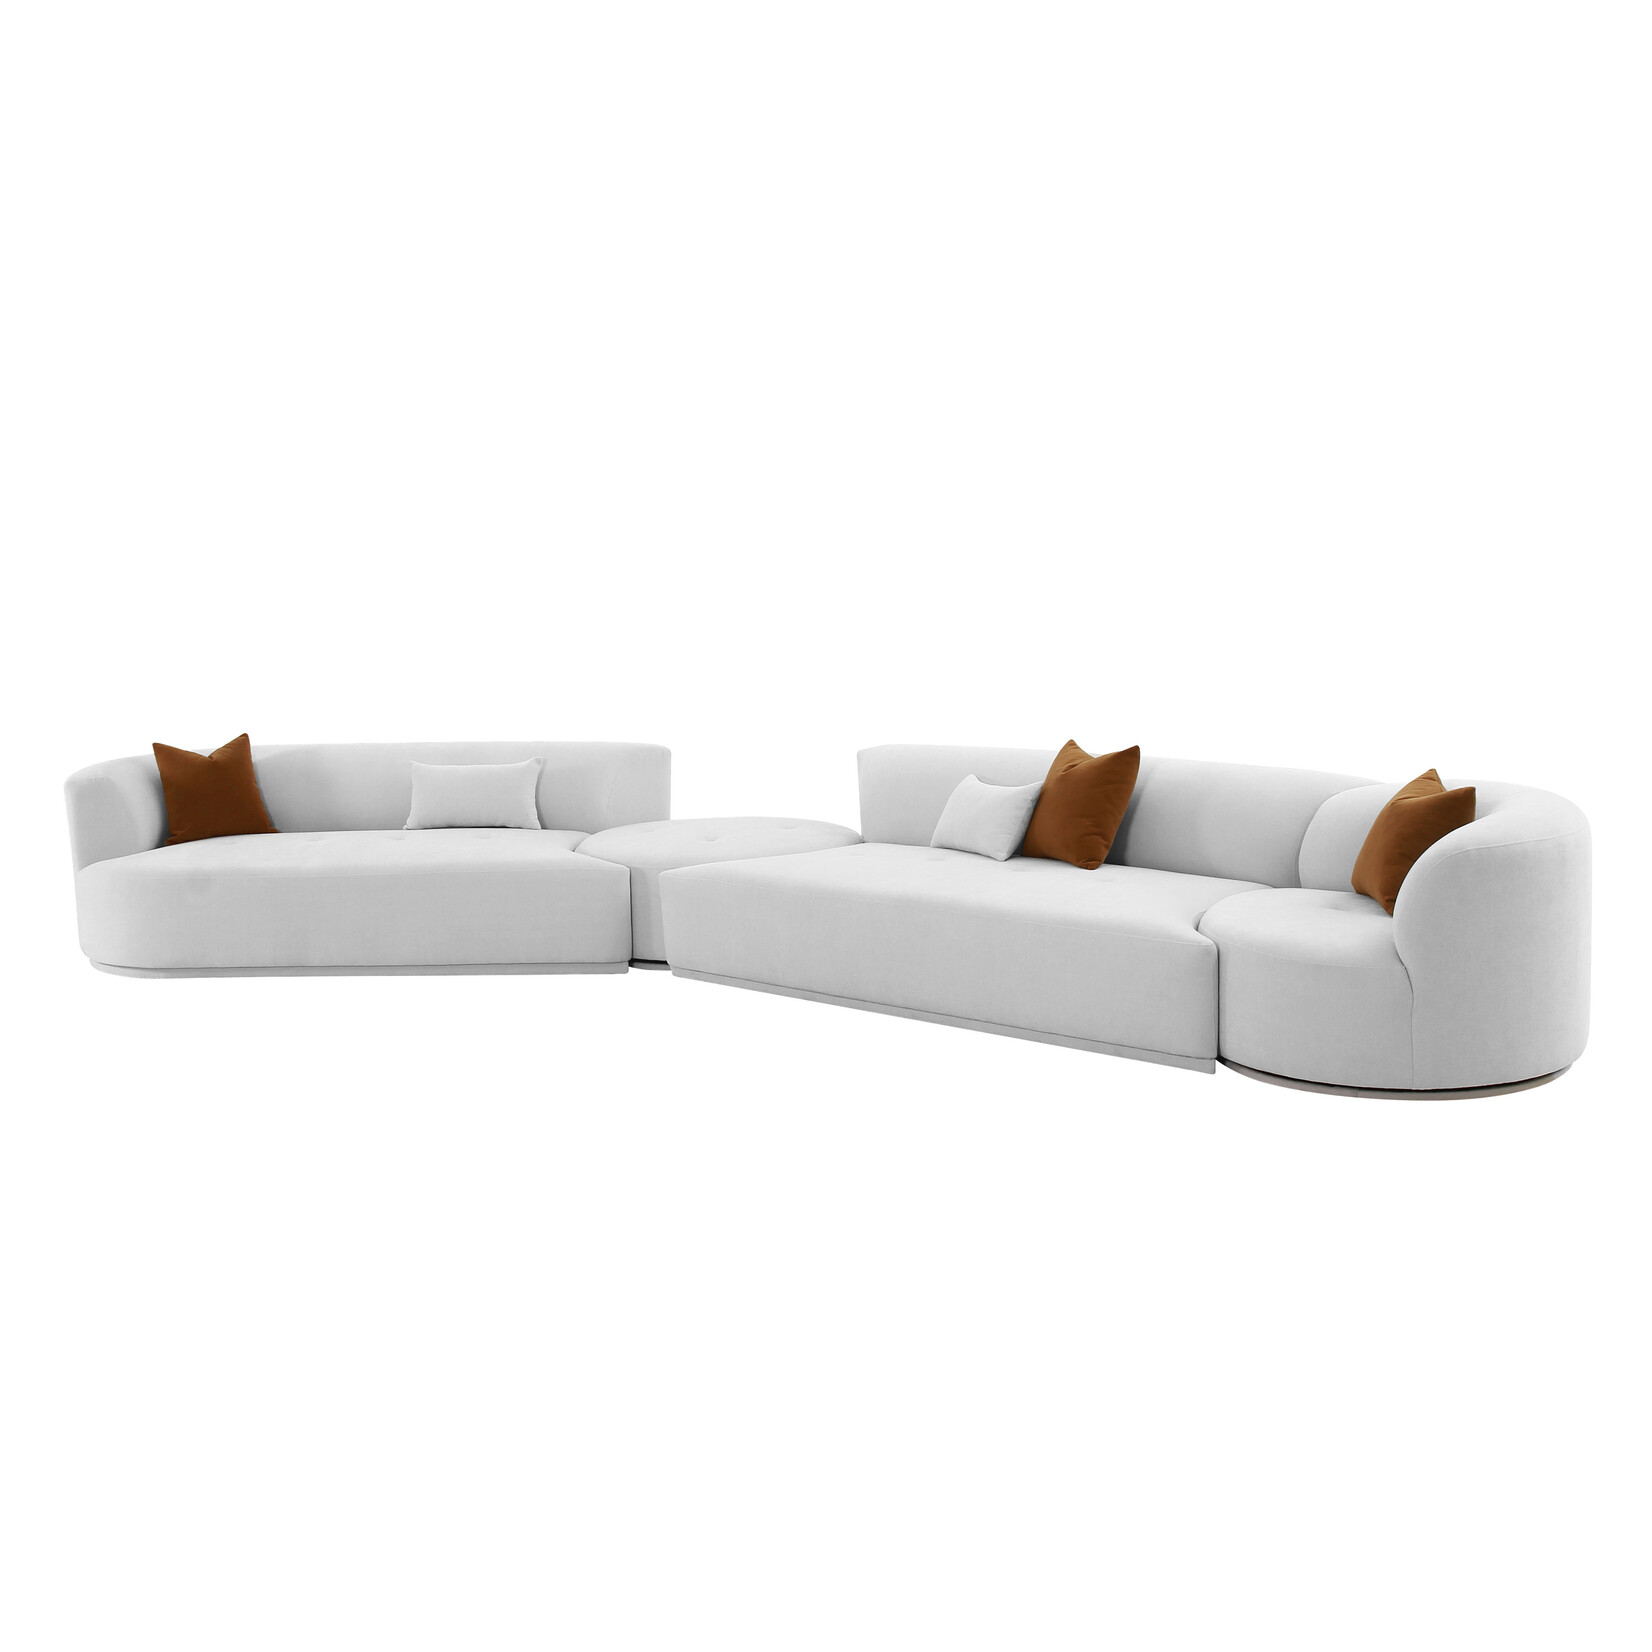 Tov FINCH CREAM BOUCLE 4-PIECE MODULAR LAF SECTIONAL